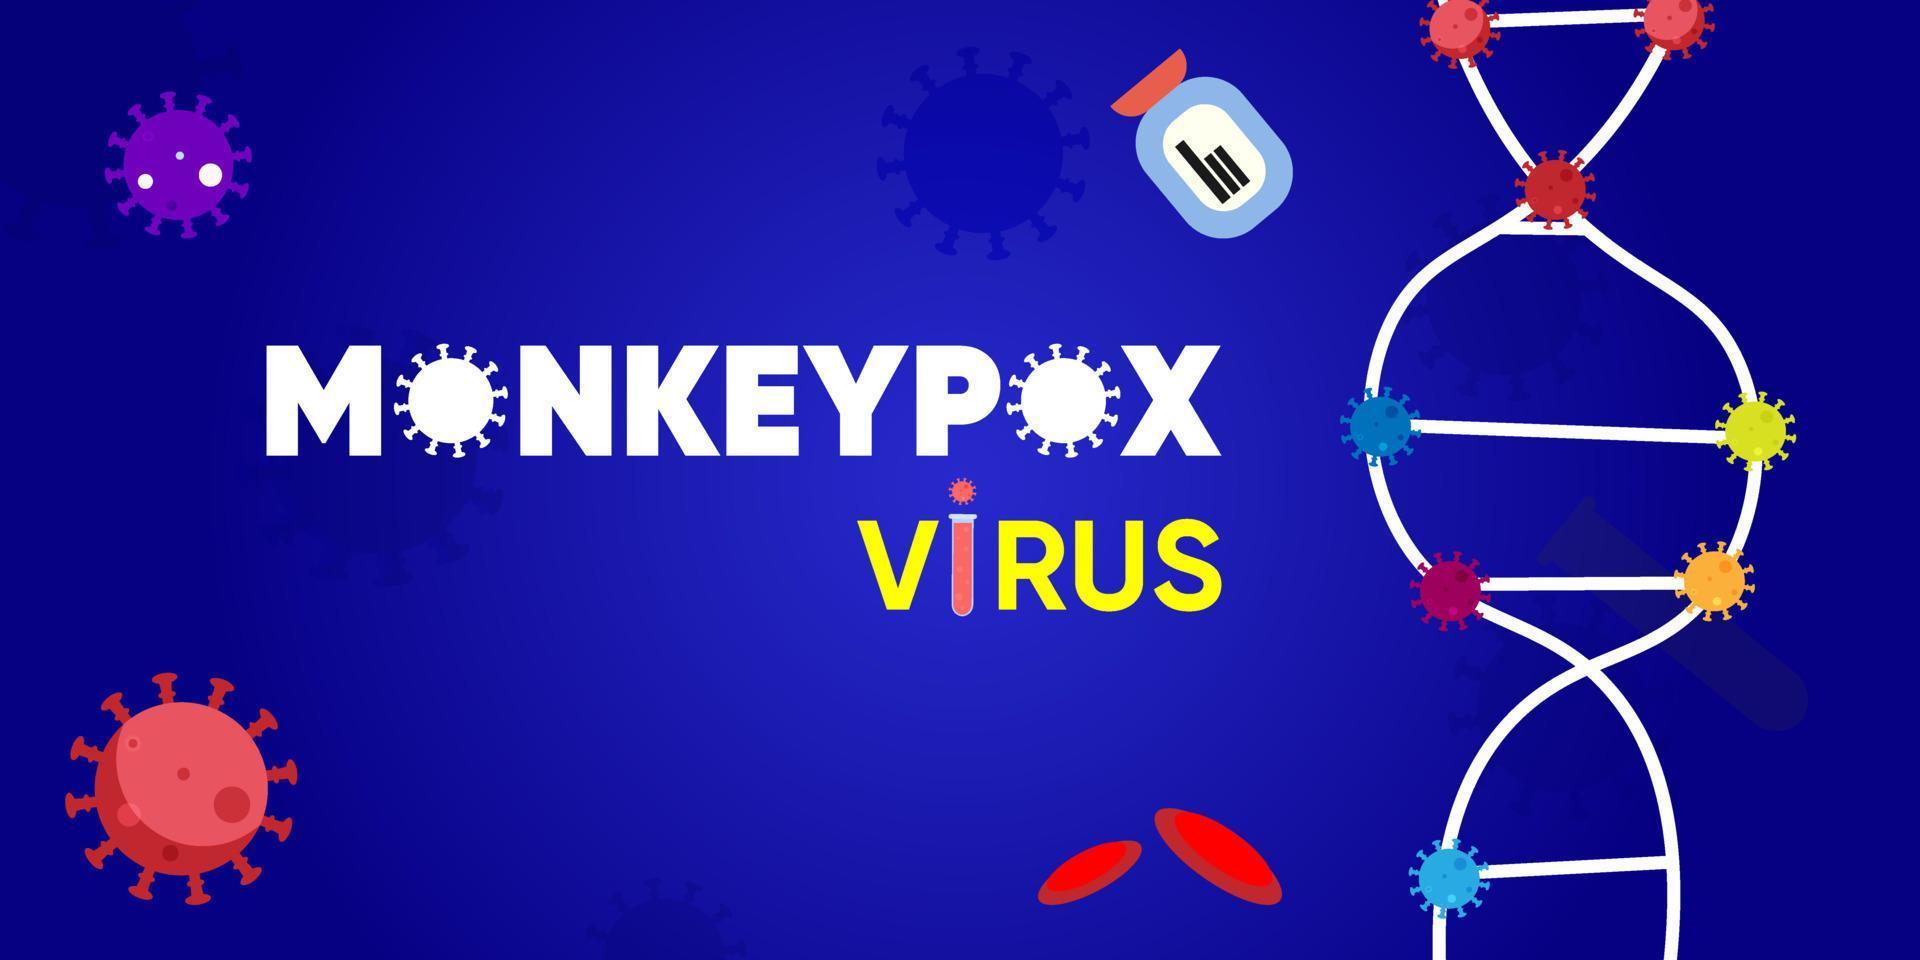 monkey pox virus poster, pox banner for your design. Vector